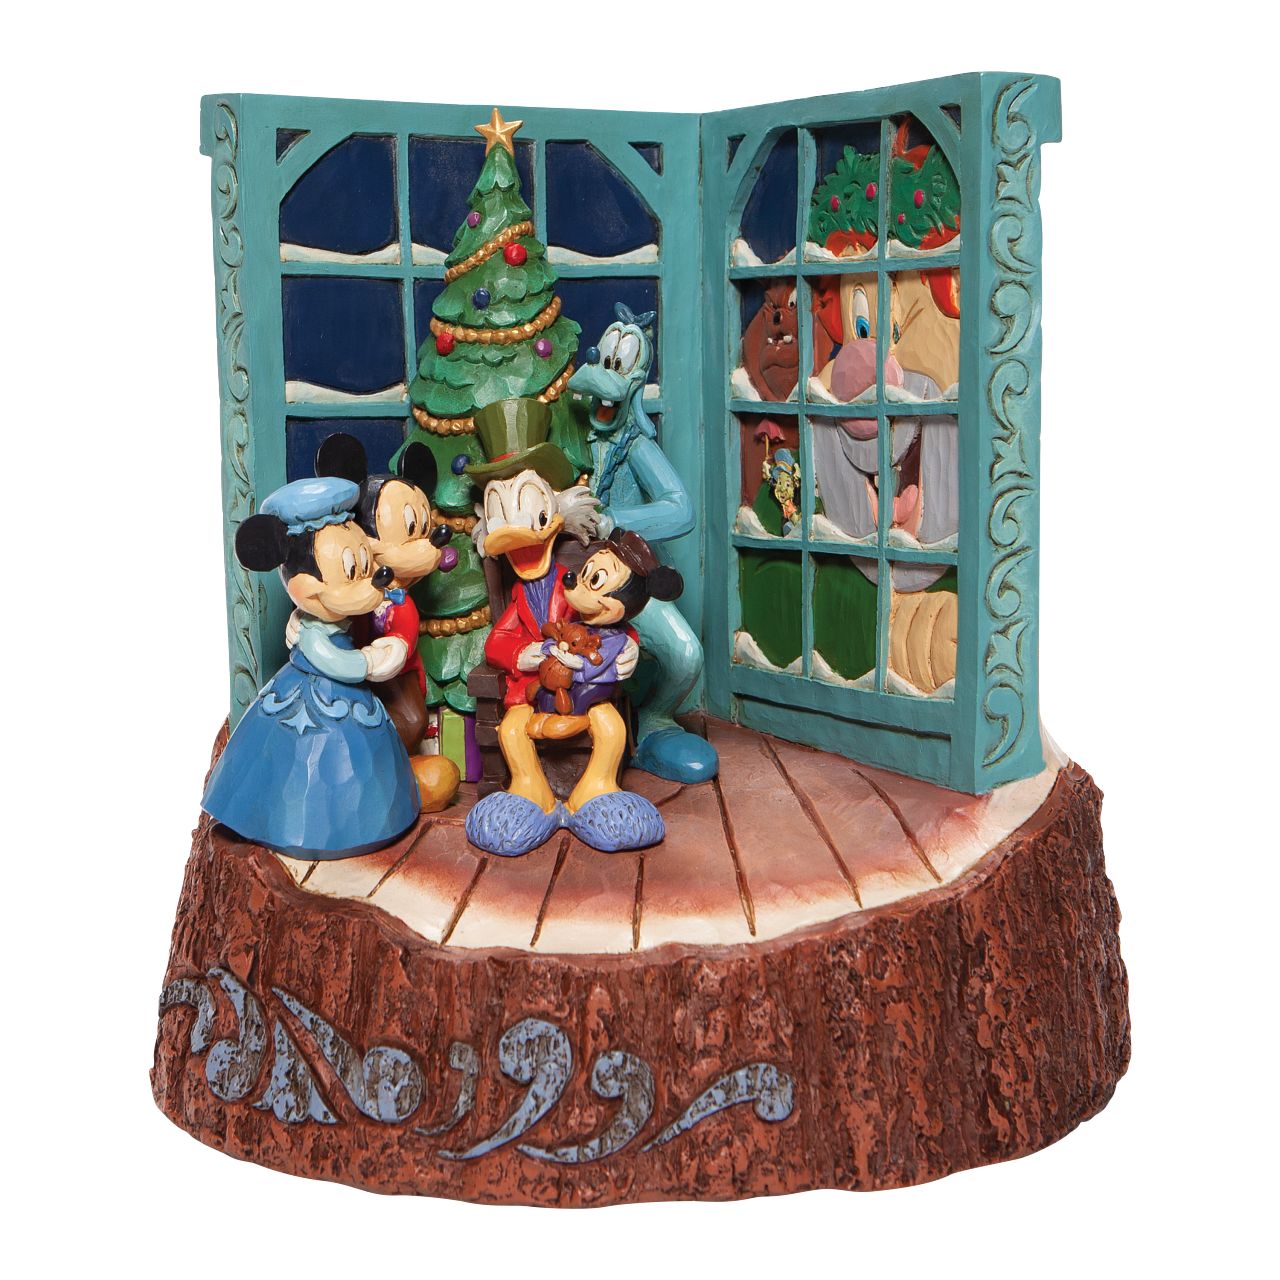 Jim Shore Mickey Mouse Christmas Carol Carved by Heart Figurine  Mickey and family gather around the tree to witness a Christmas Carol retelling by Scrooge McDuck. With windows alight with narrative imagery, they're in for a treat celebrating Christmas past, present and future in this nostalgic design by Jim Shore.